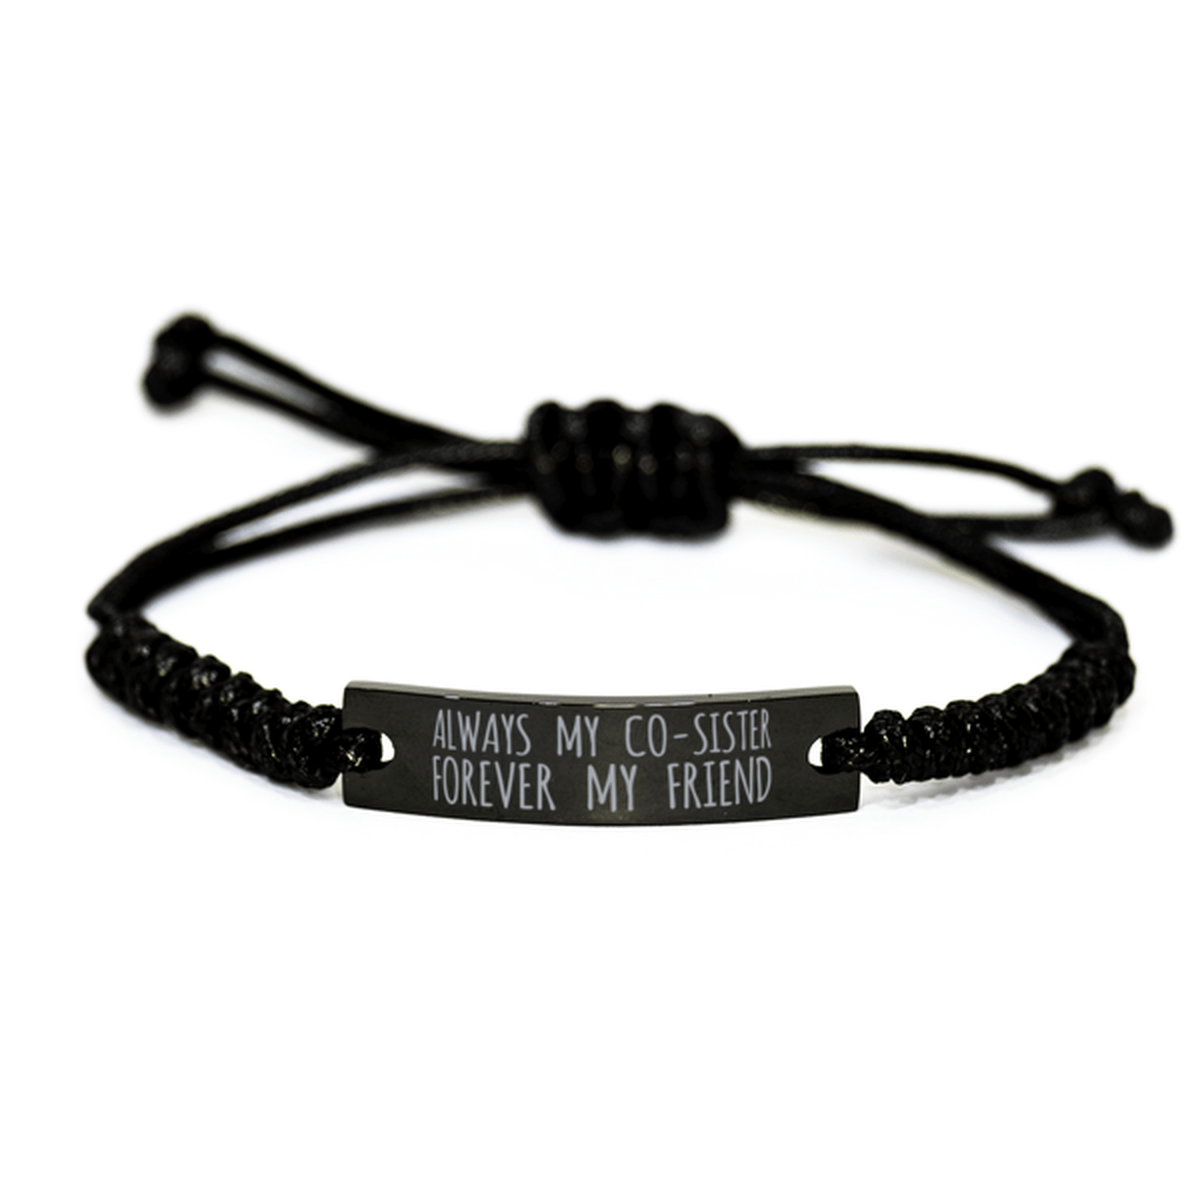 Inspirational Co-Sister Black Rope Bracelet, Always My Co-Sister Forever My Friend, Best Birthday Gifts For Family